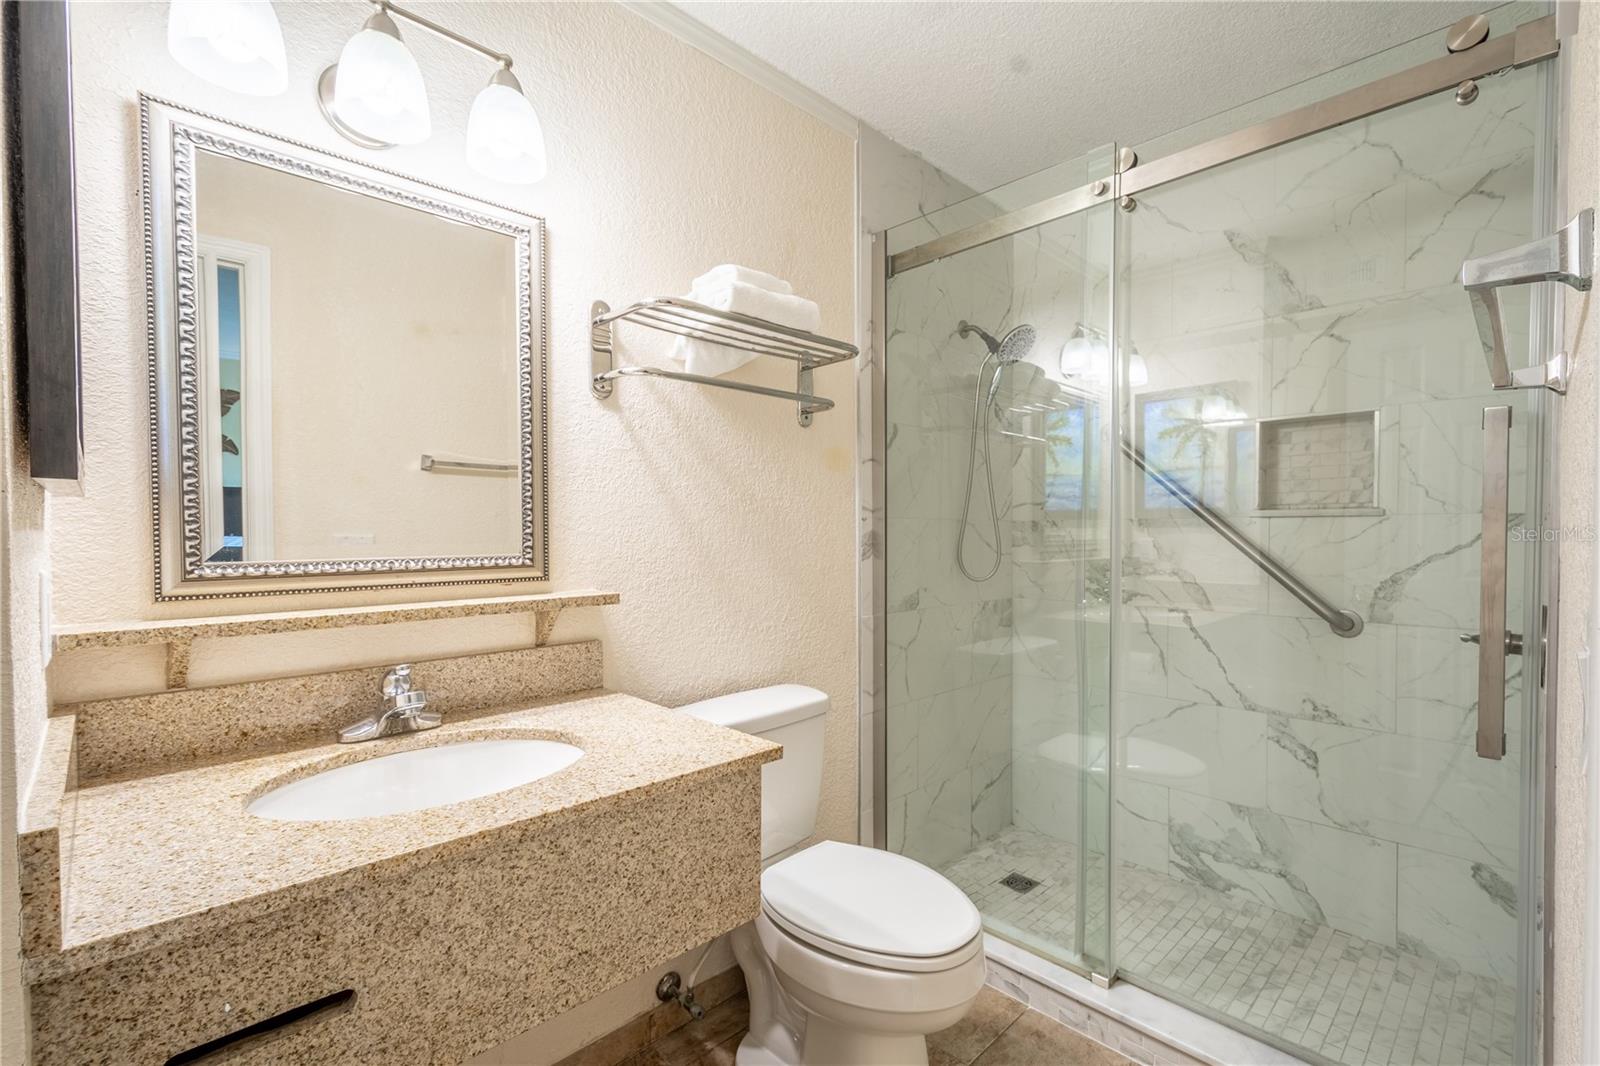 Primary bath includes mirrored sink with granite counter and a walk-in shower.